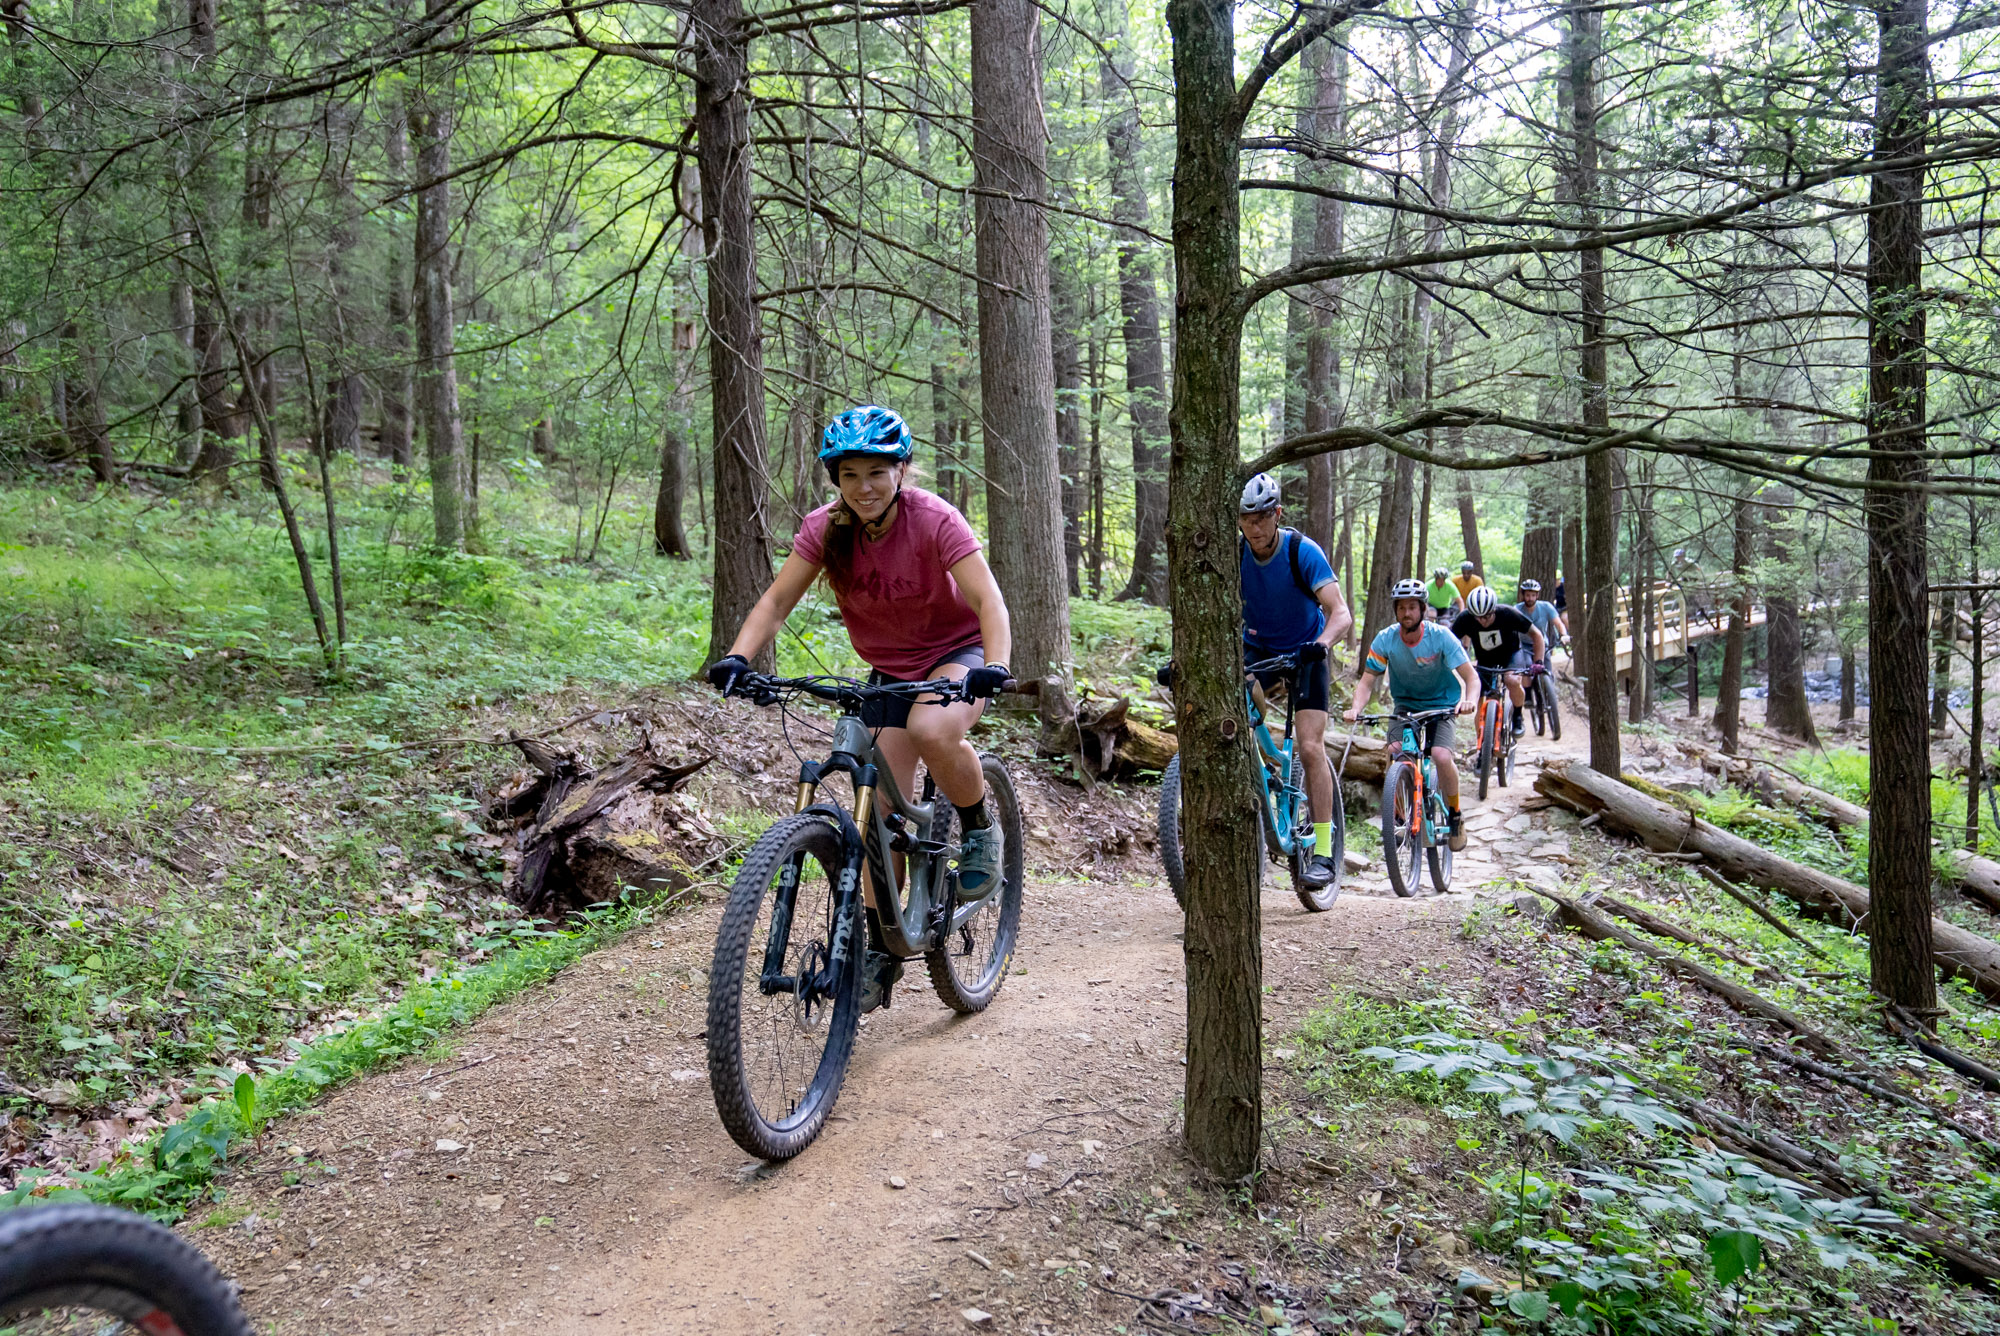 Photograph of cyclists riding on new trail in forest.